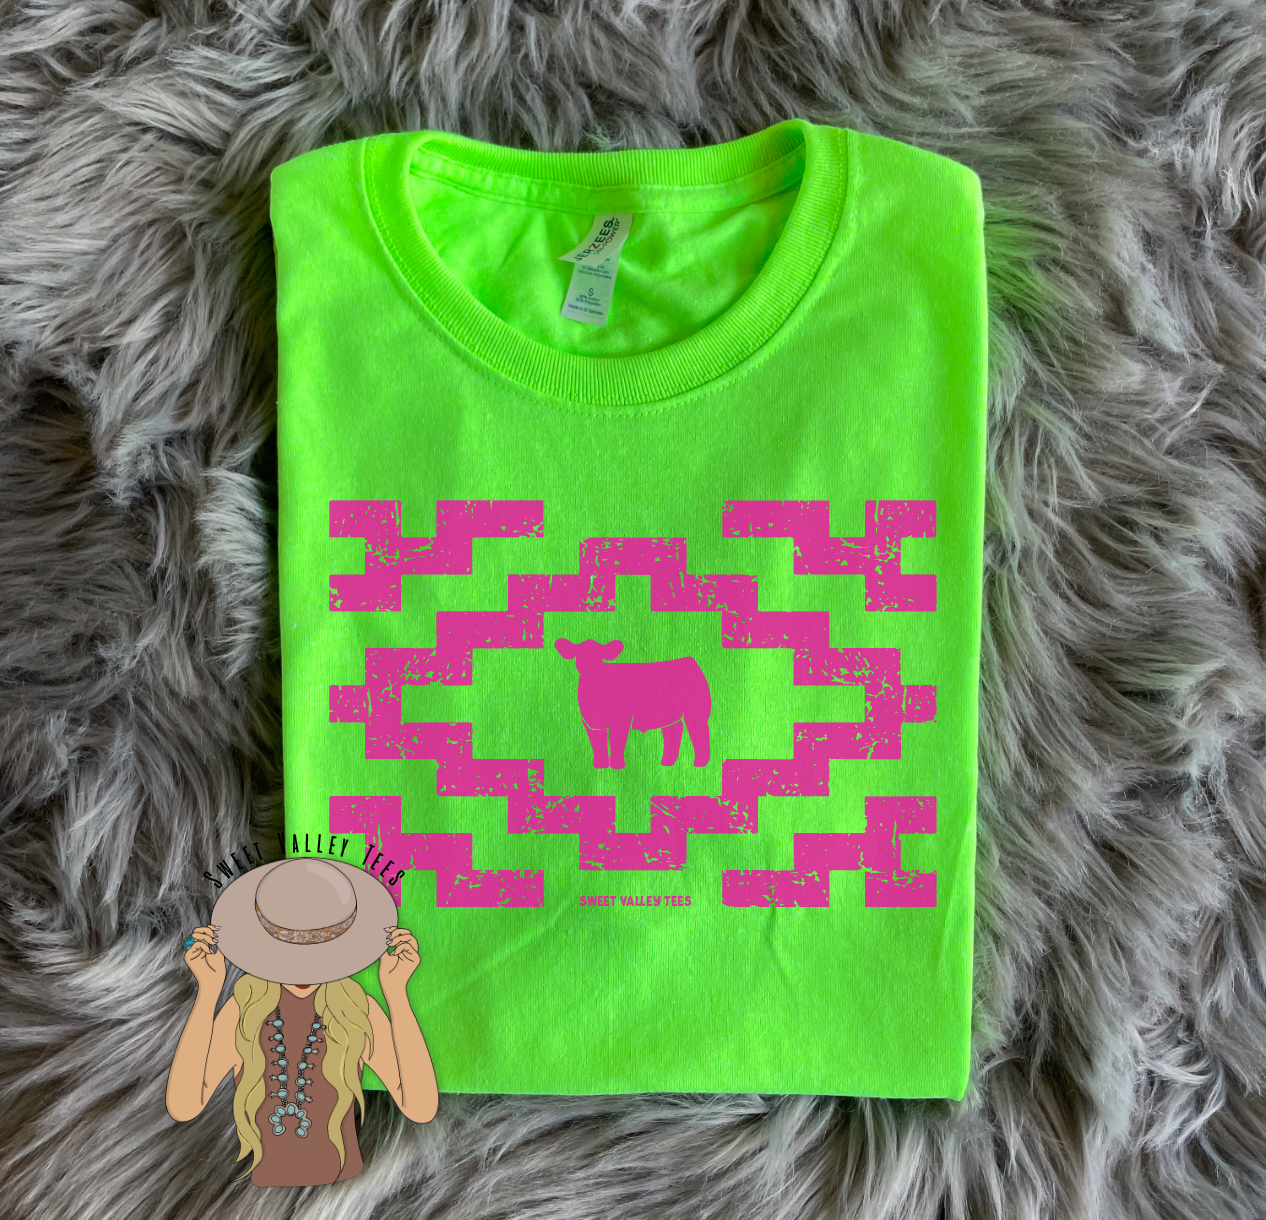 Pink Show Steer Aztec Tee - Neon Green - YOUTH Sizes Available